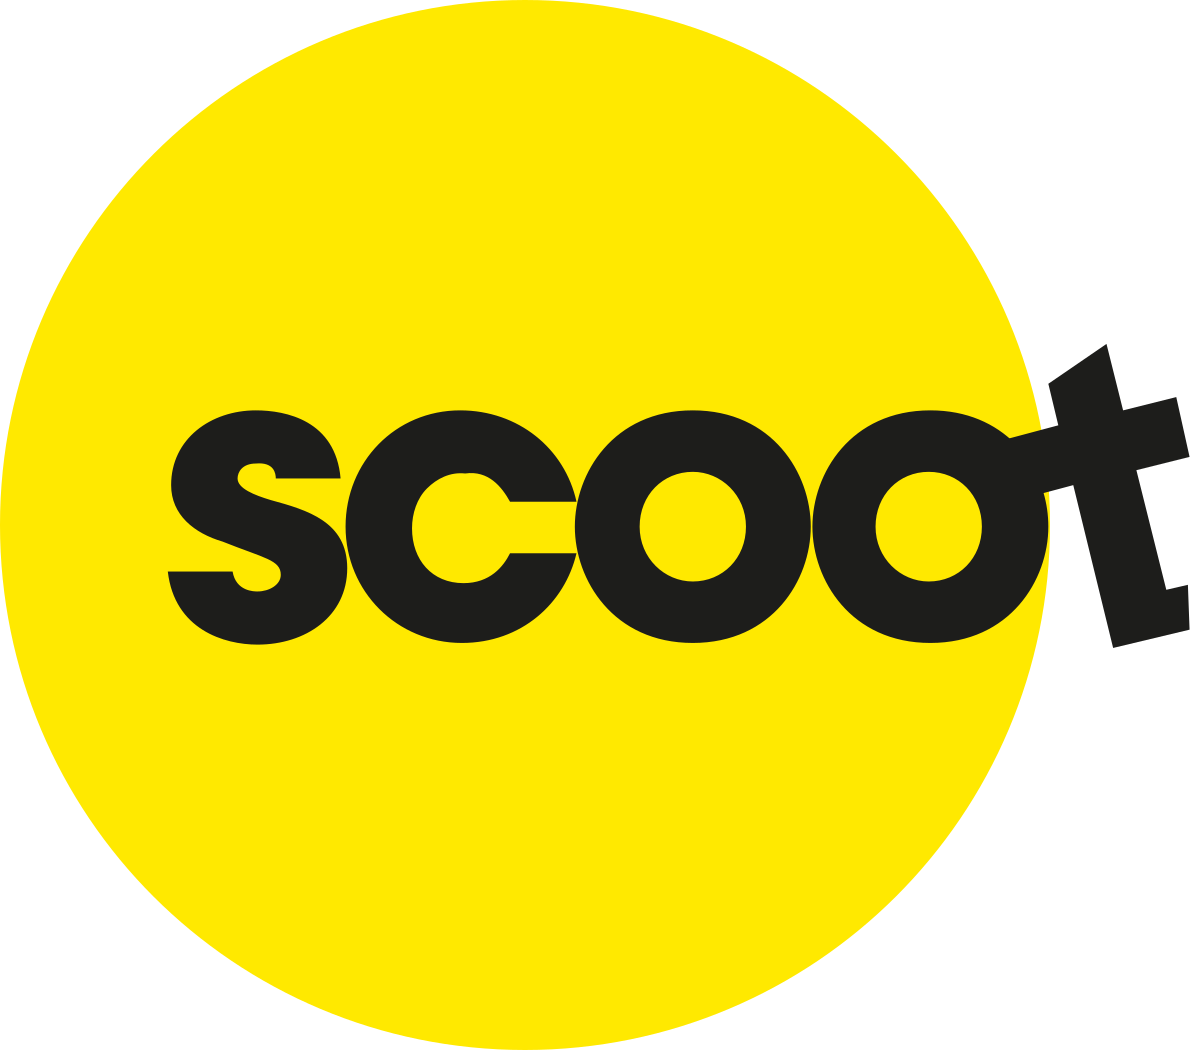 1200px-Scoot_logo.svg.png